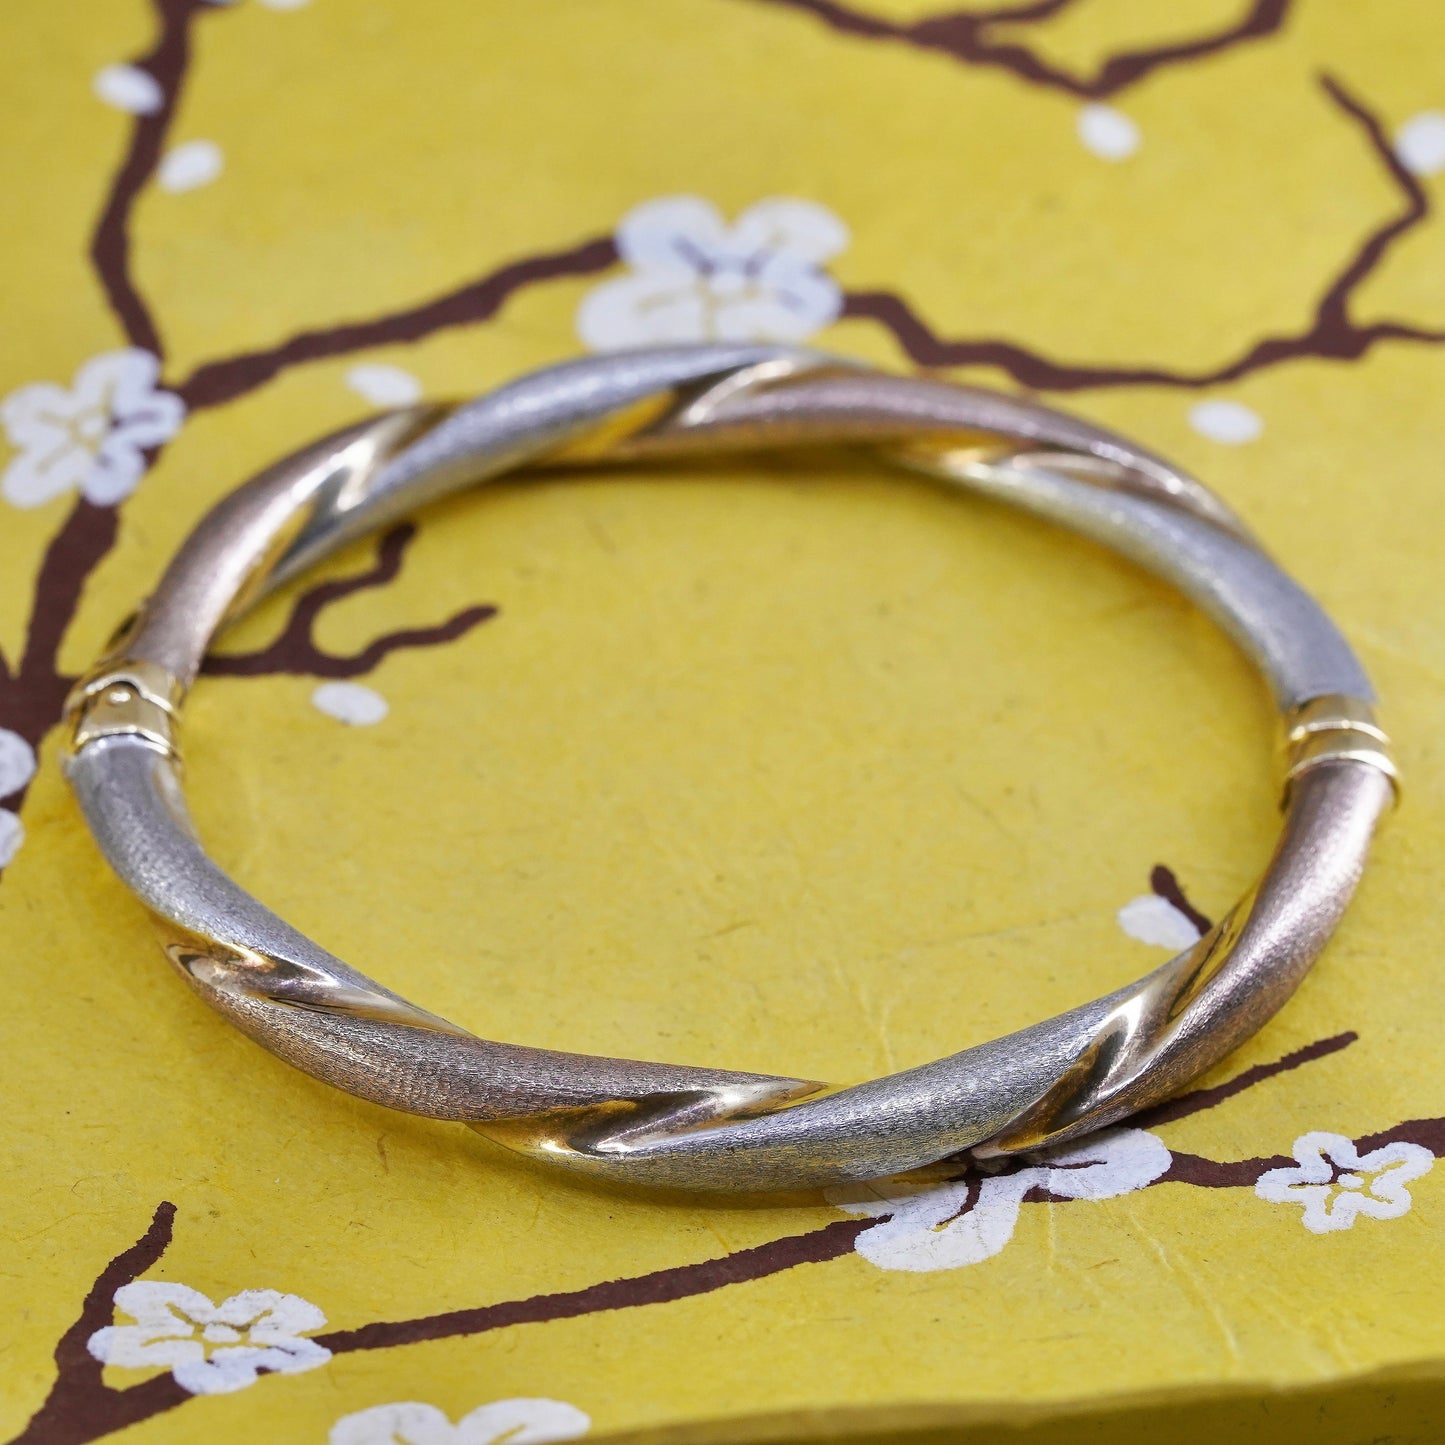 7”, triple tone rose yellow gold Sterling silver bracelet, Italy 925 bangle